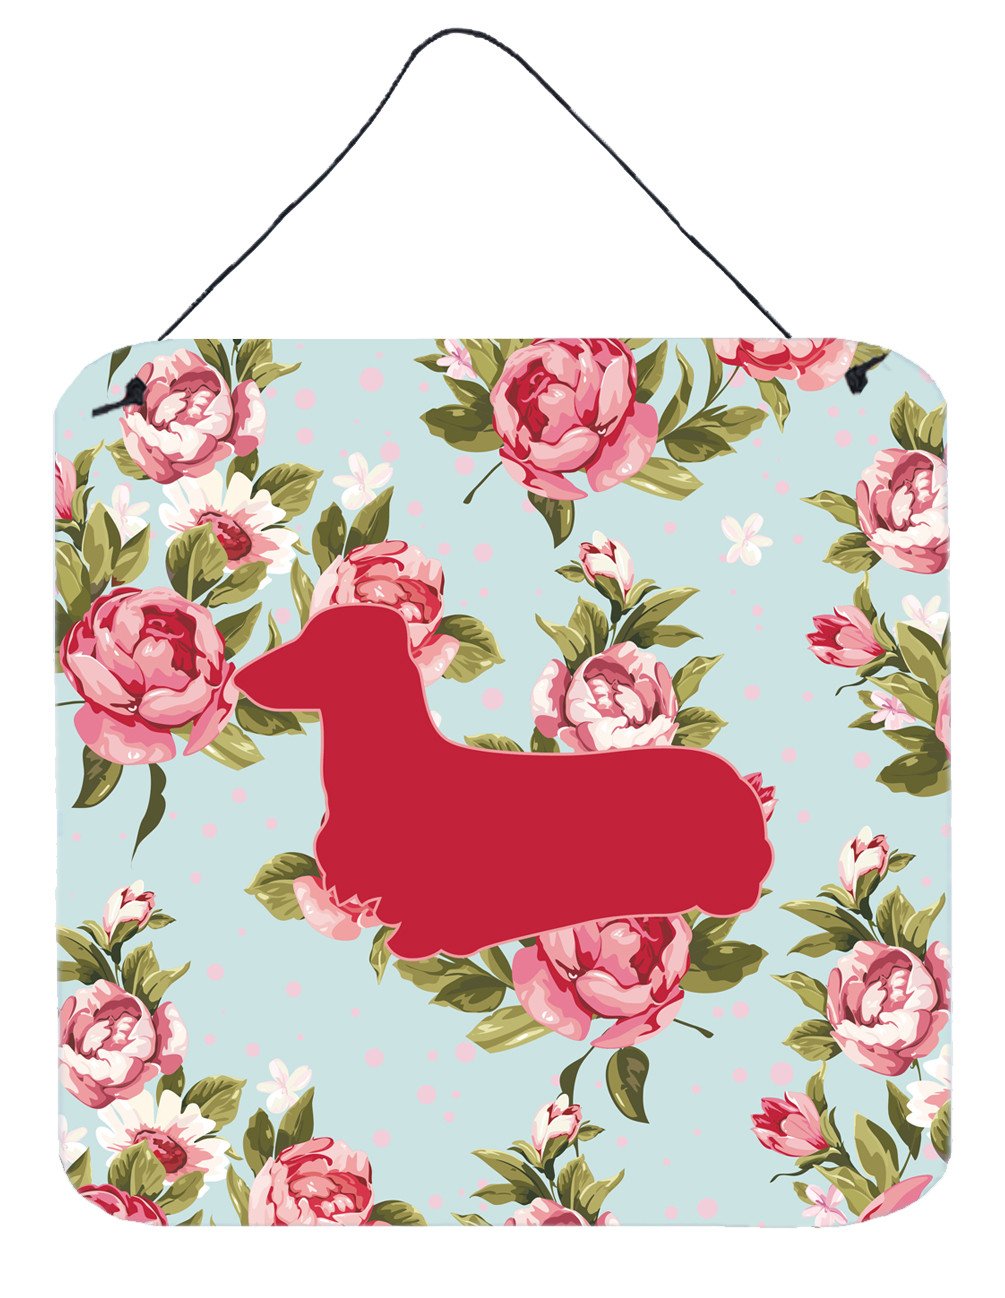 Dachshund Shabby Chic Blue Roses Wall or Door Hanging Prints BB1078 by Caroline's Treasures